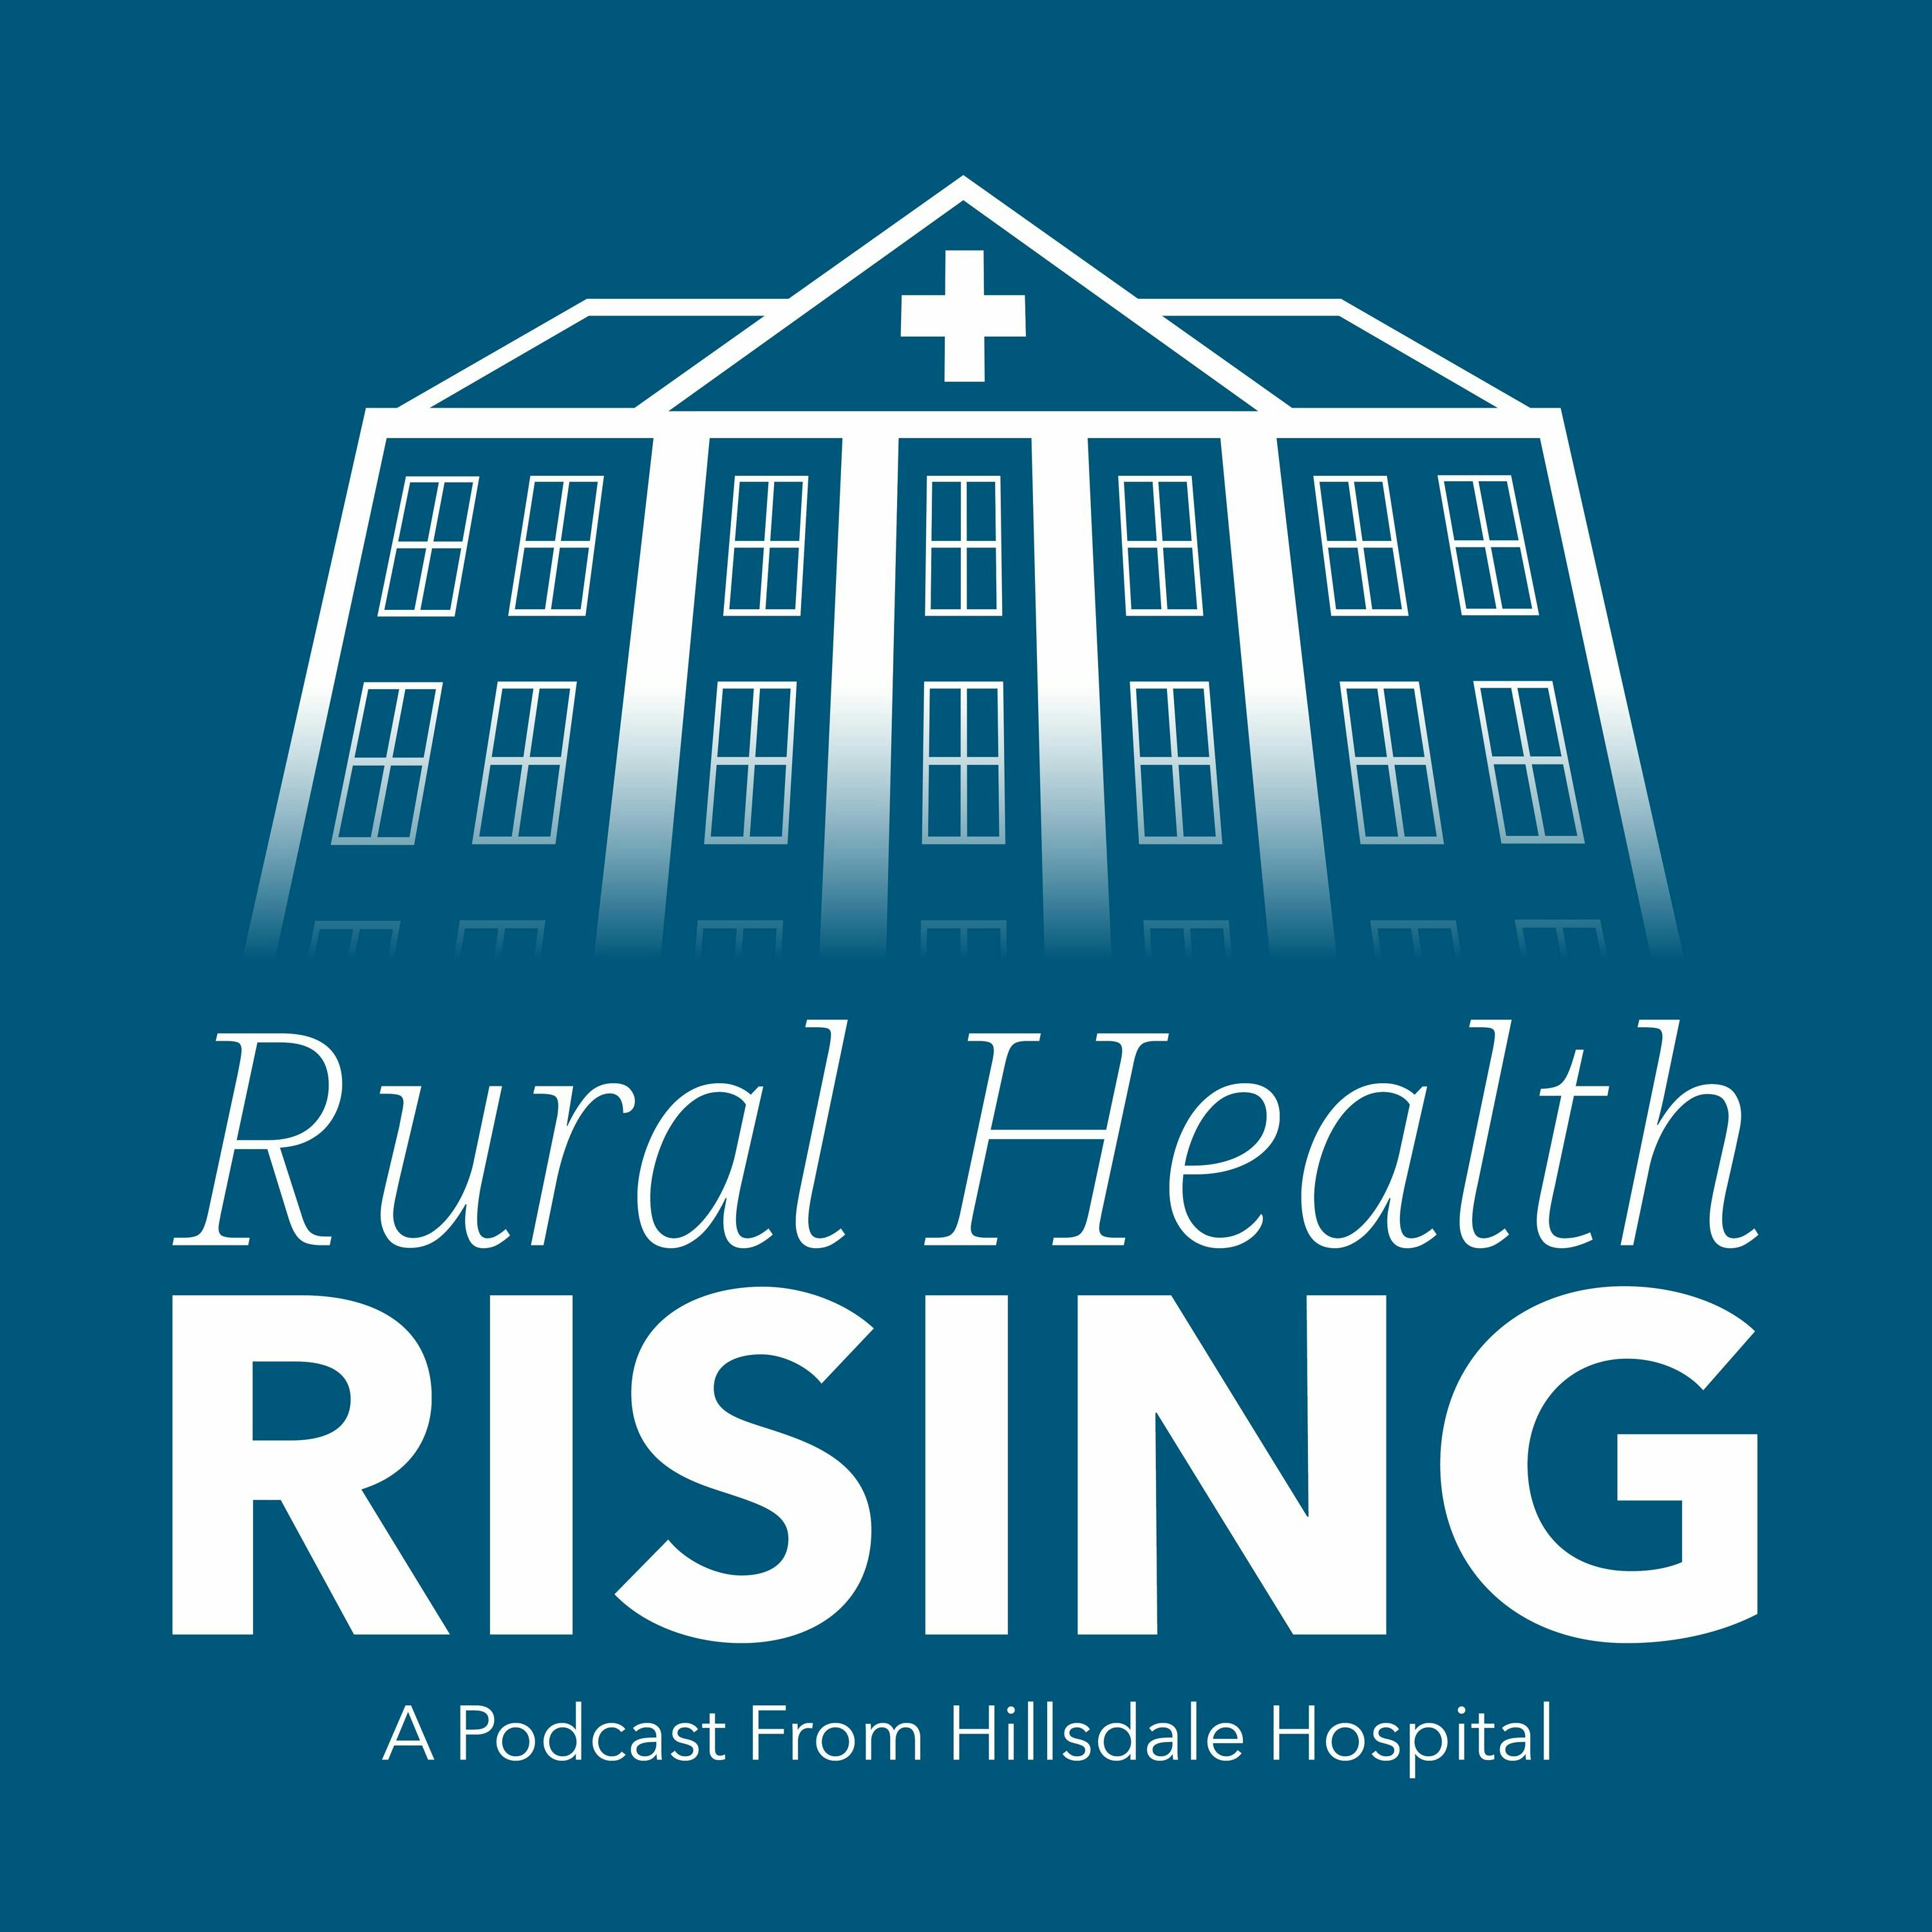 Episode 14: The 5 Ps of Rural Health: Policy